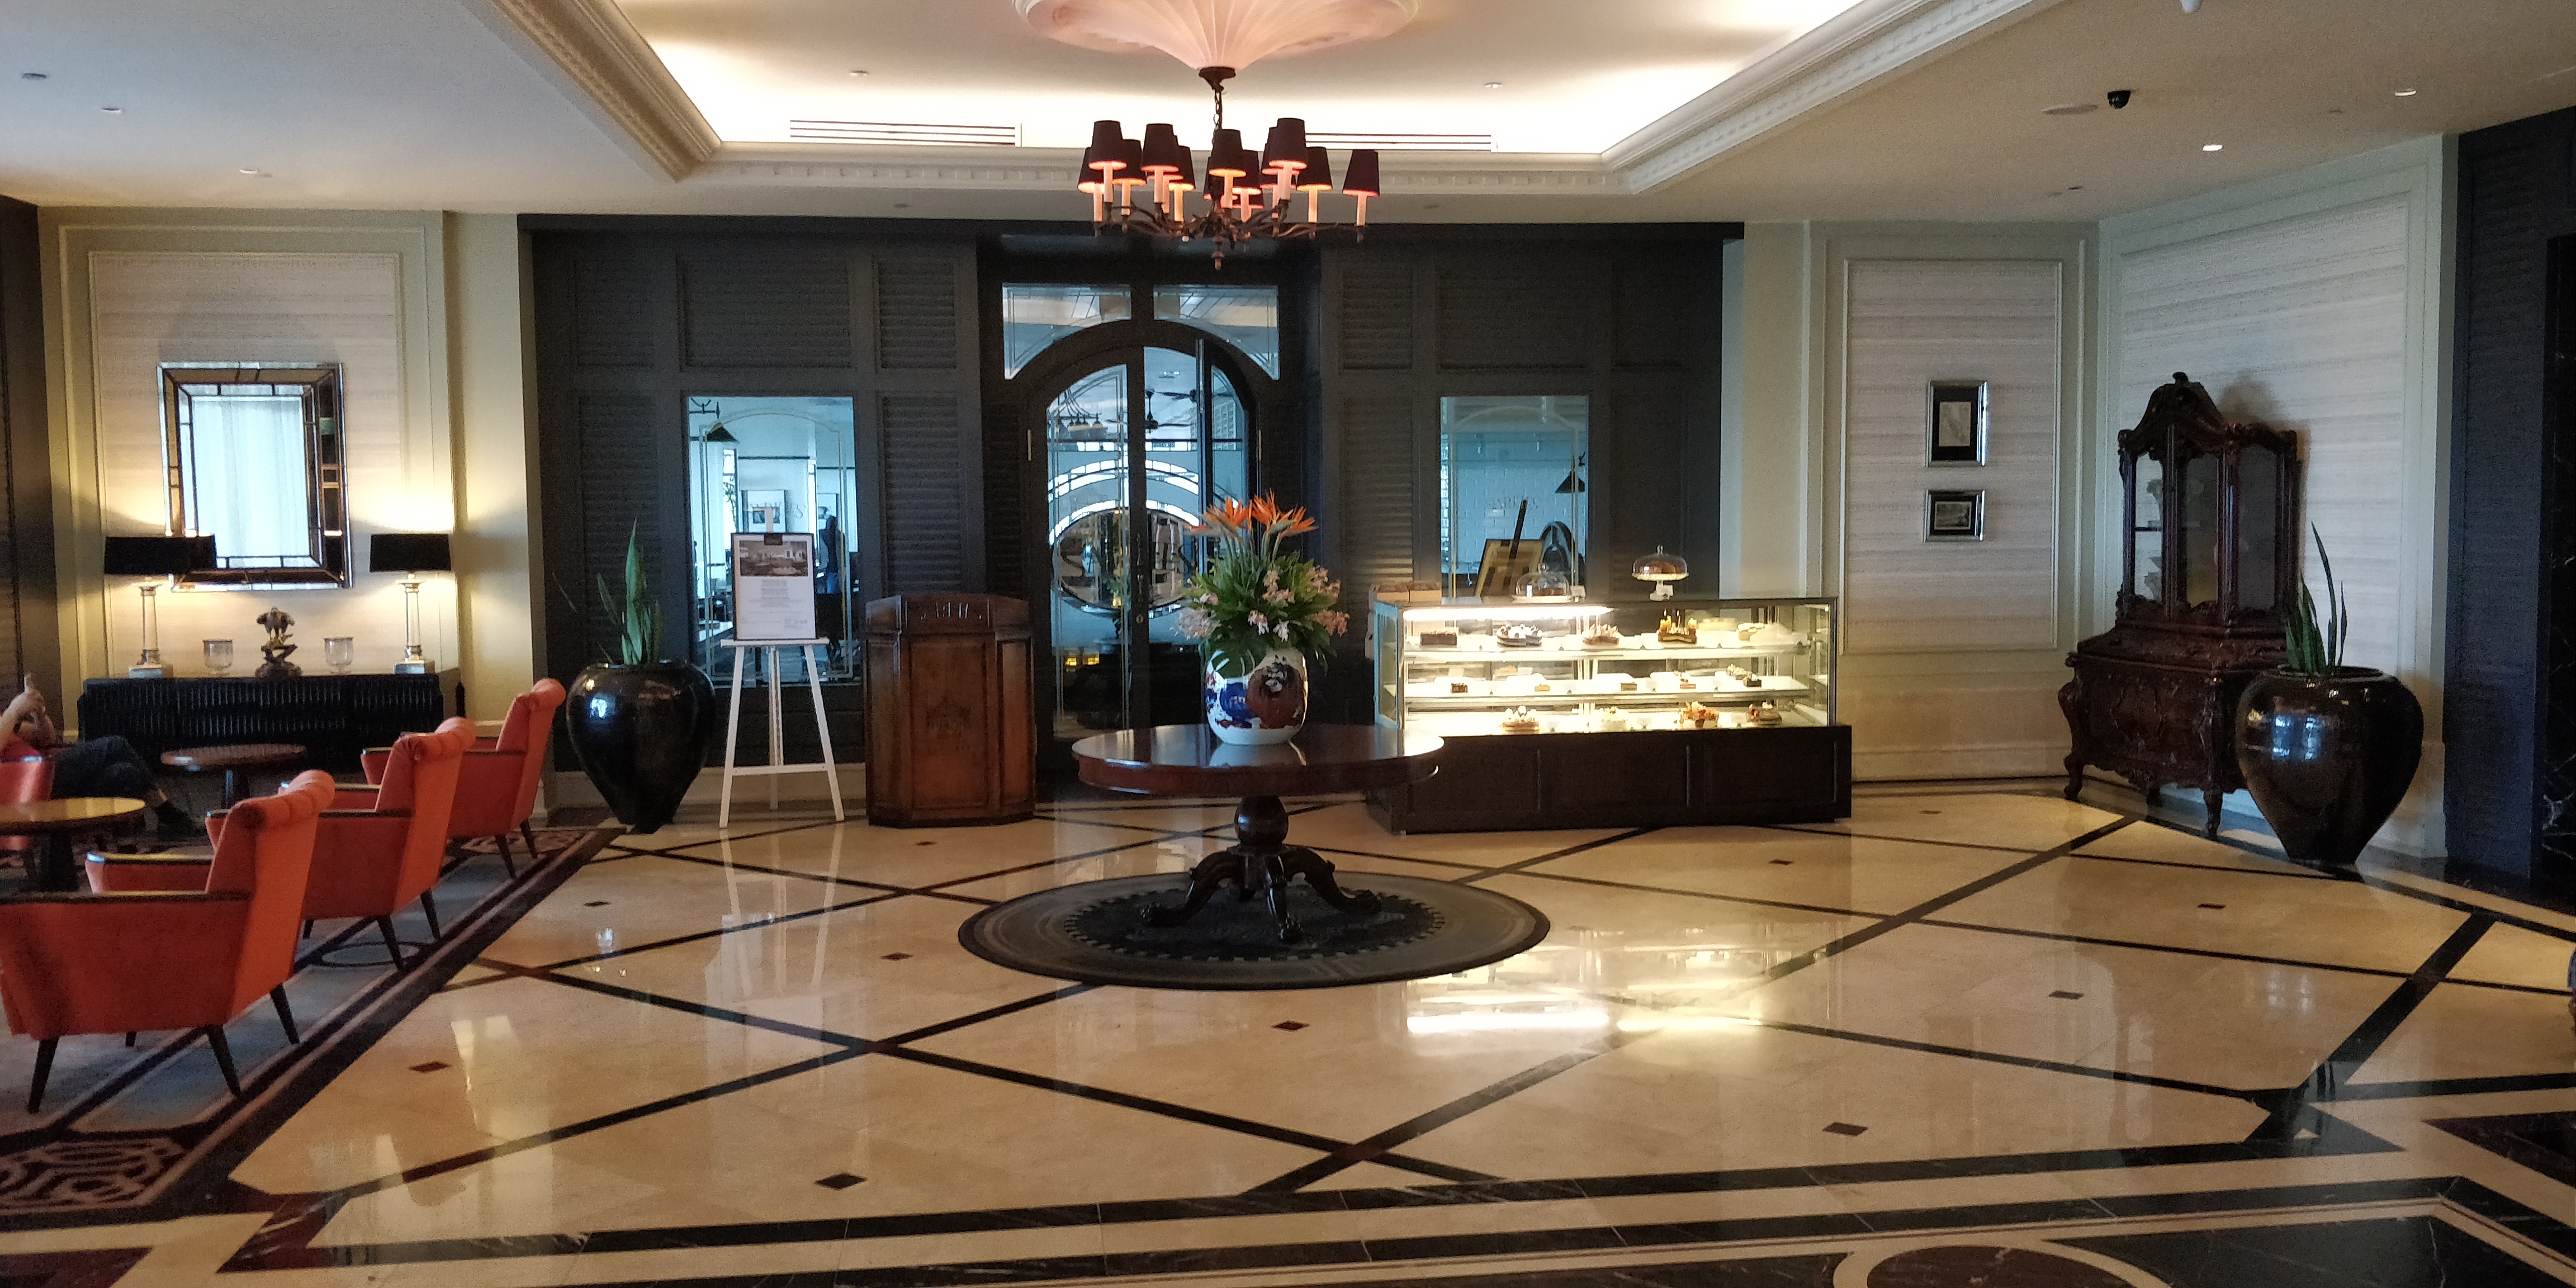 A PICTURE OF THE LOBBY ENTRANCE TO SARKIES